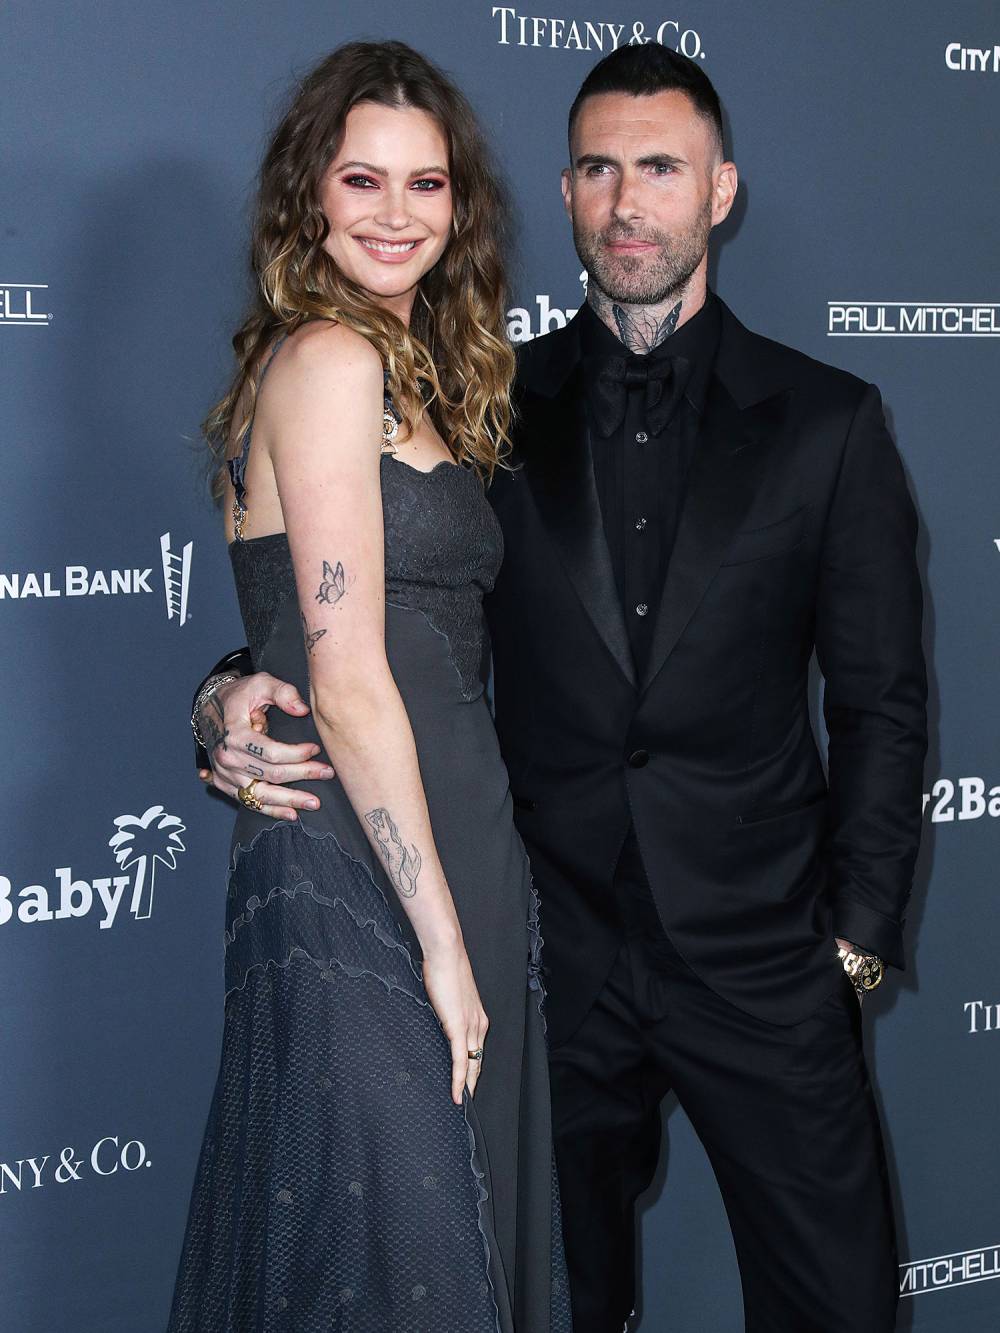 Adam Levine and Pregnant Behati Prinsloo Are All Smiles on Beach Outing as Fallout From Cheating Allegations Continues 2